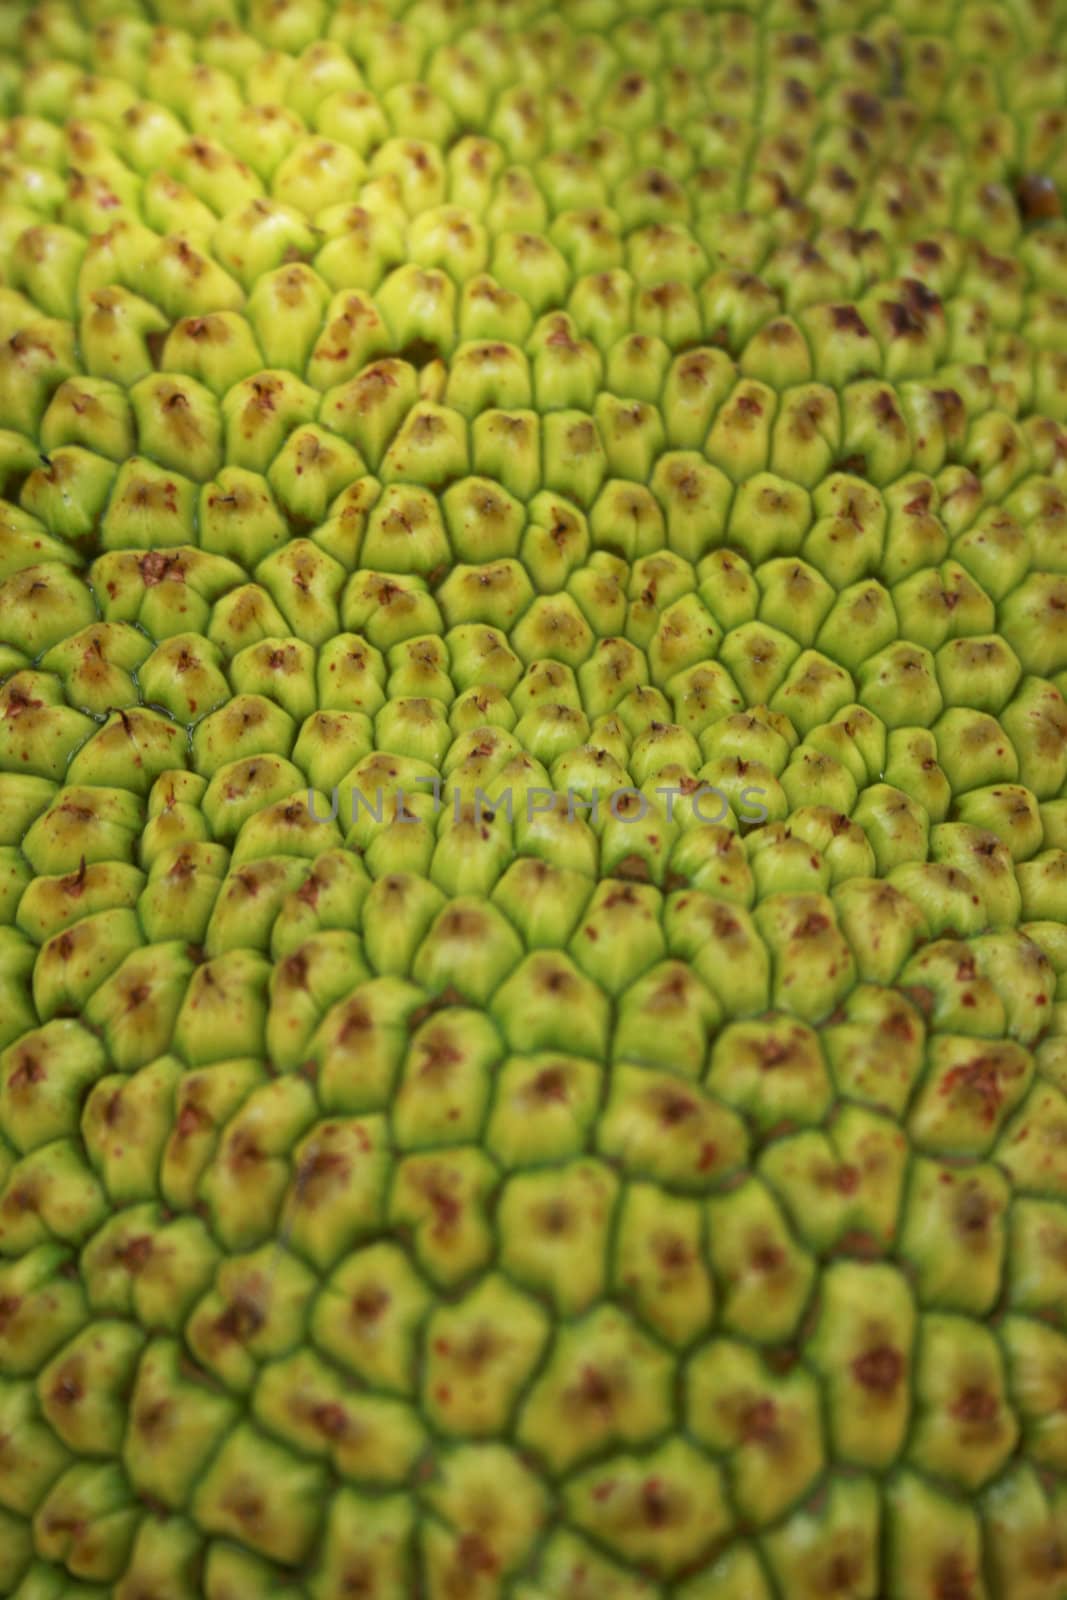 Jack fruit texture which can use as background in design.